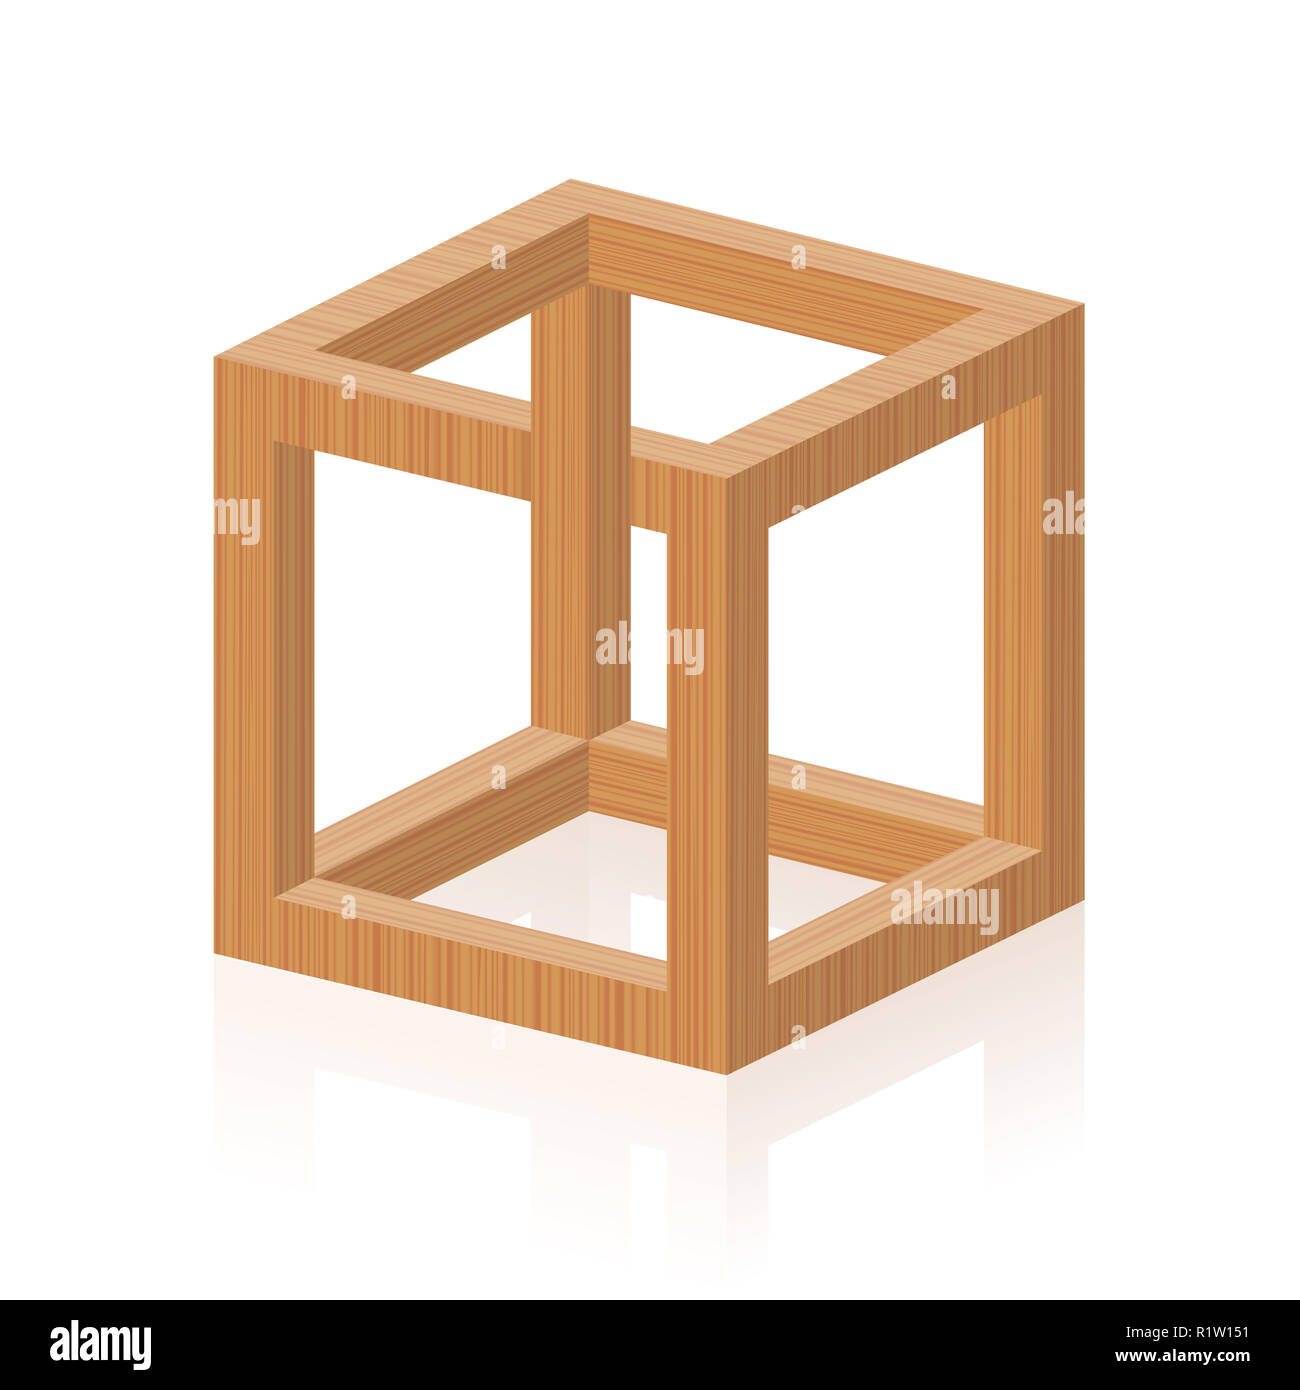 Optical illusion. Impossible or irrational cube, invented by M.C. Escher - wooden textured illustration on white background. Stock Photo